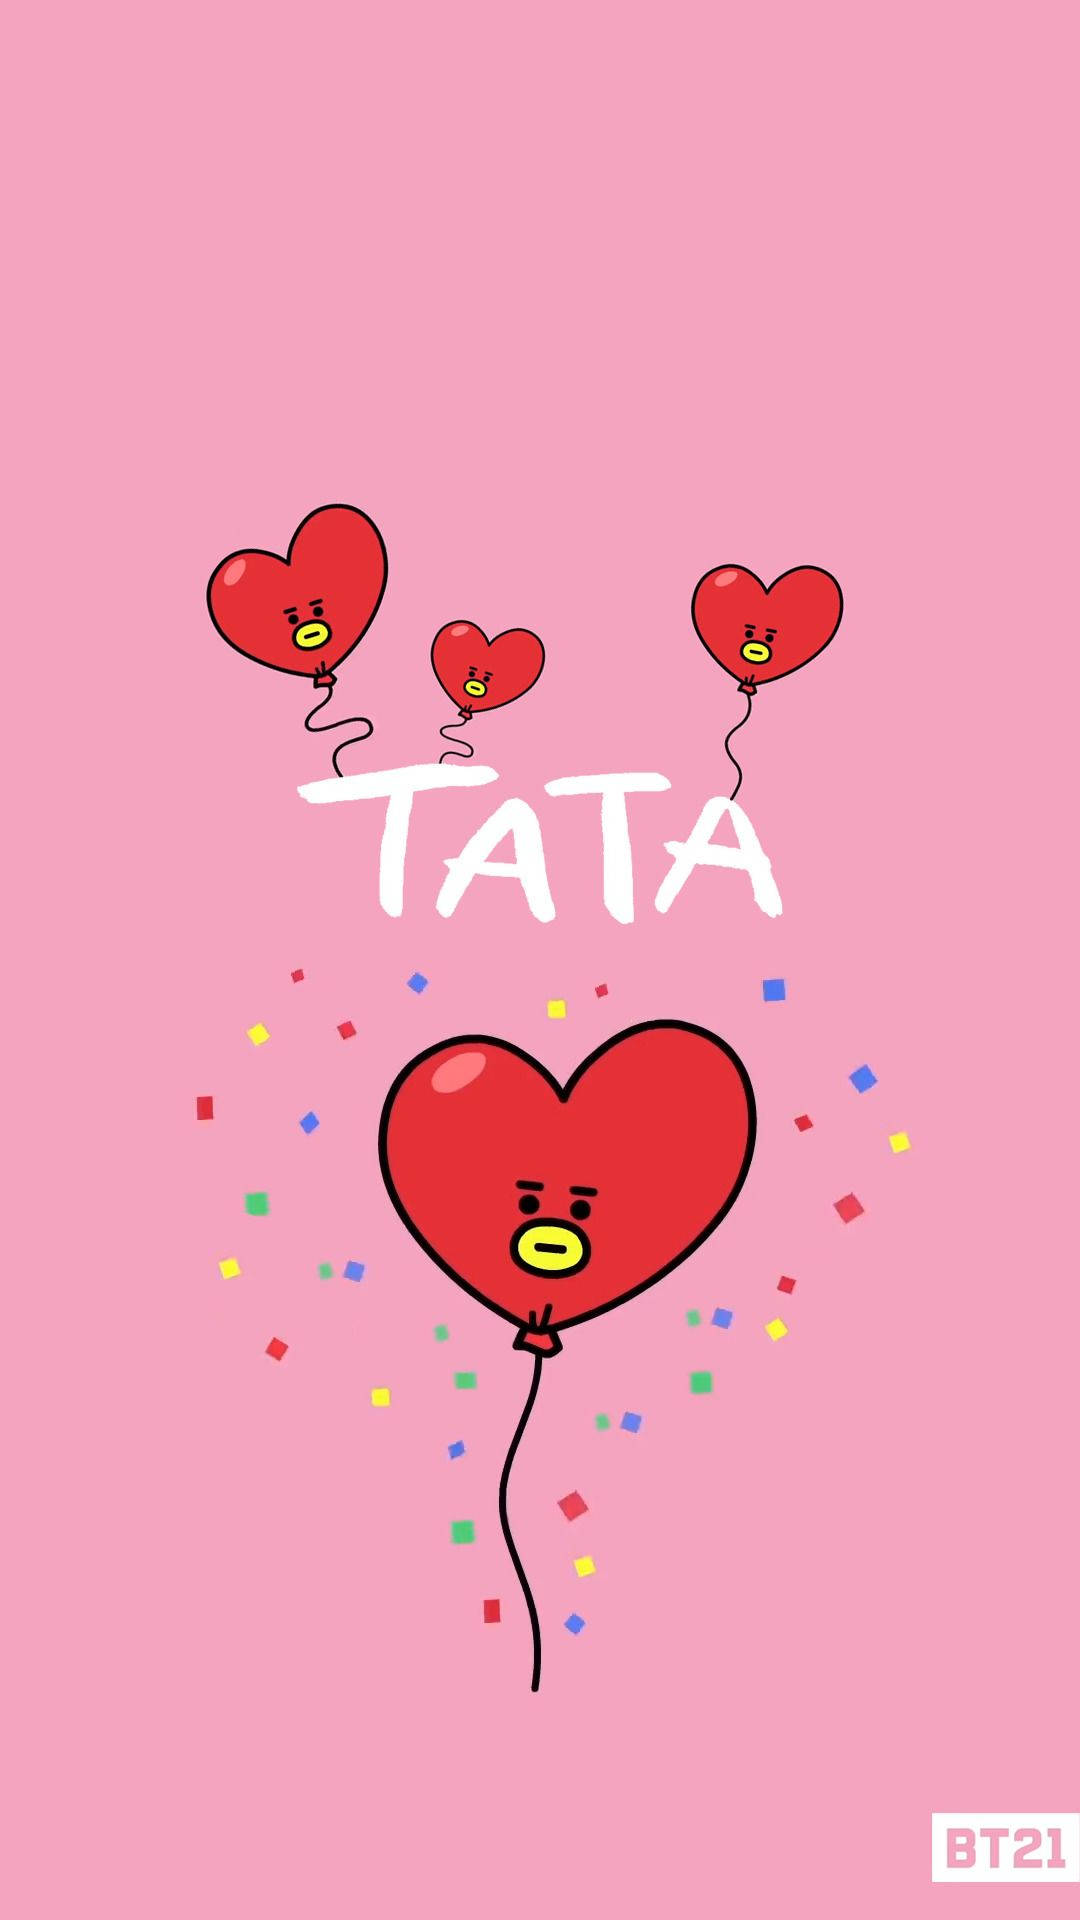 Bt21 Tata Party Background